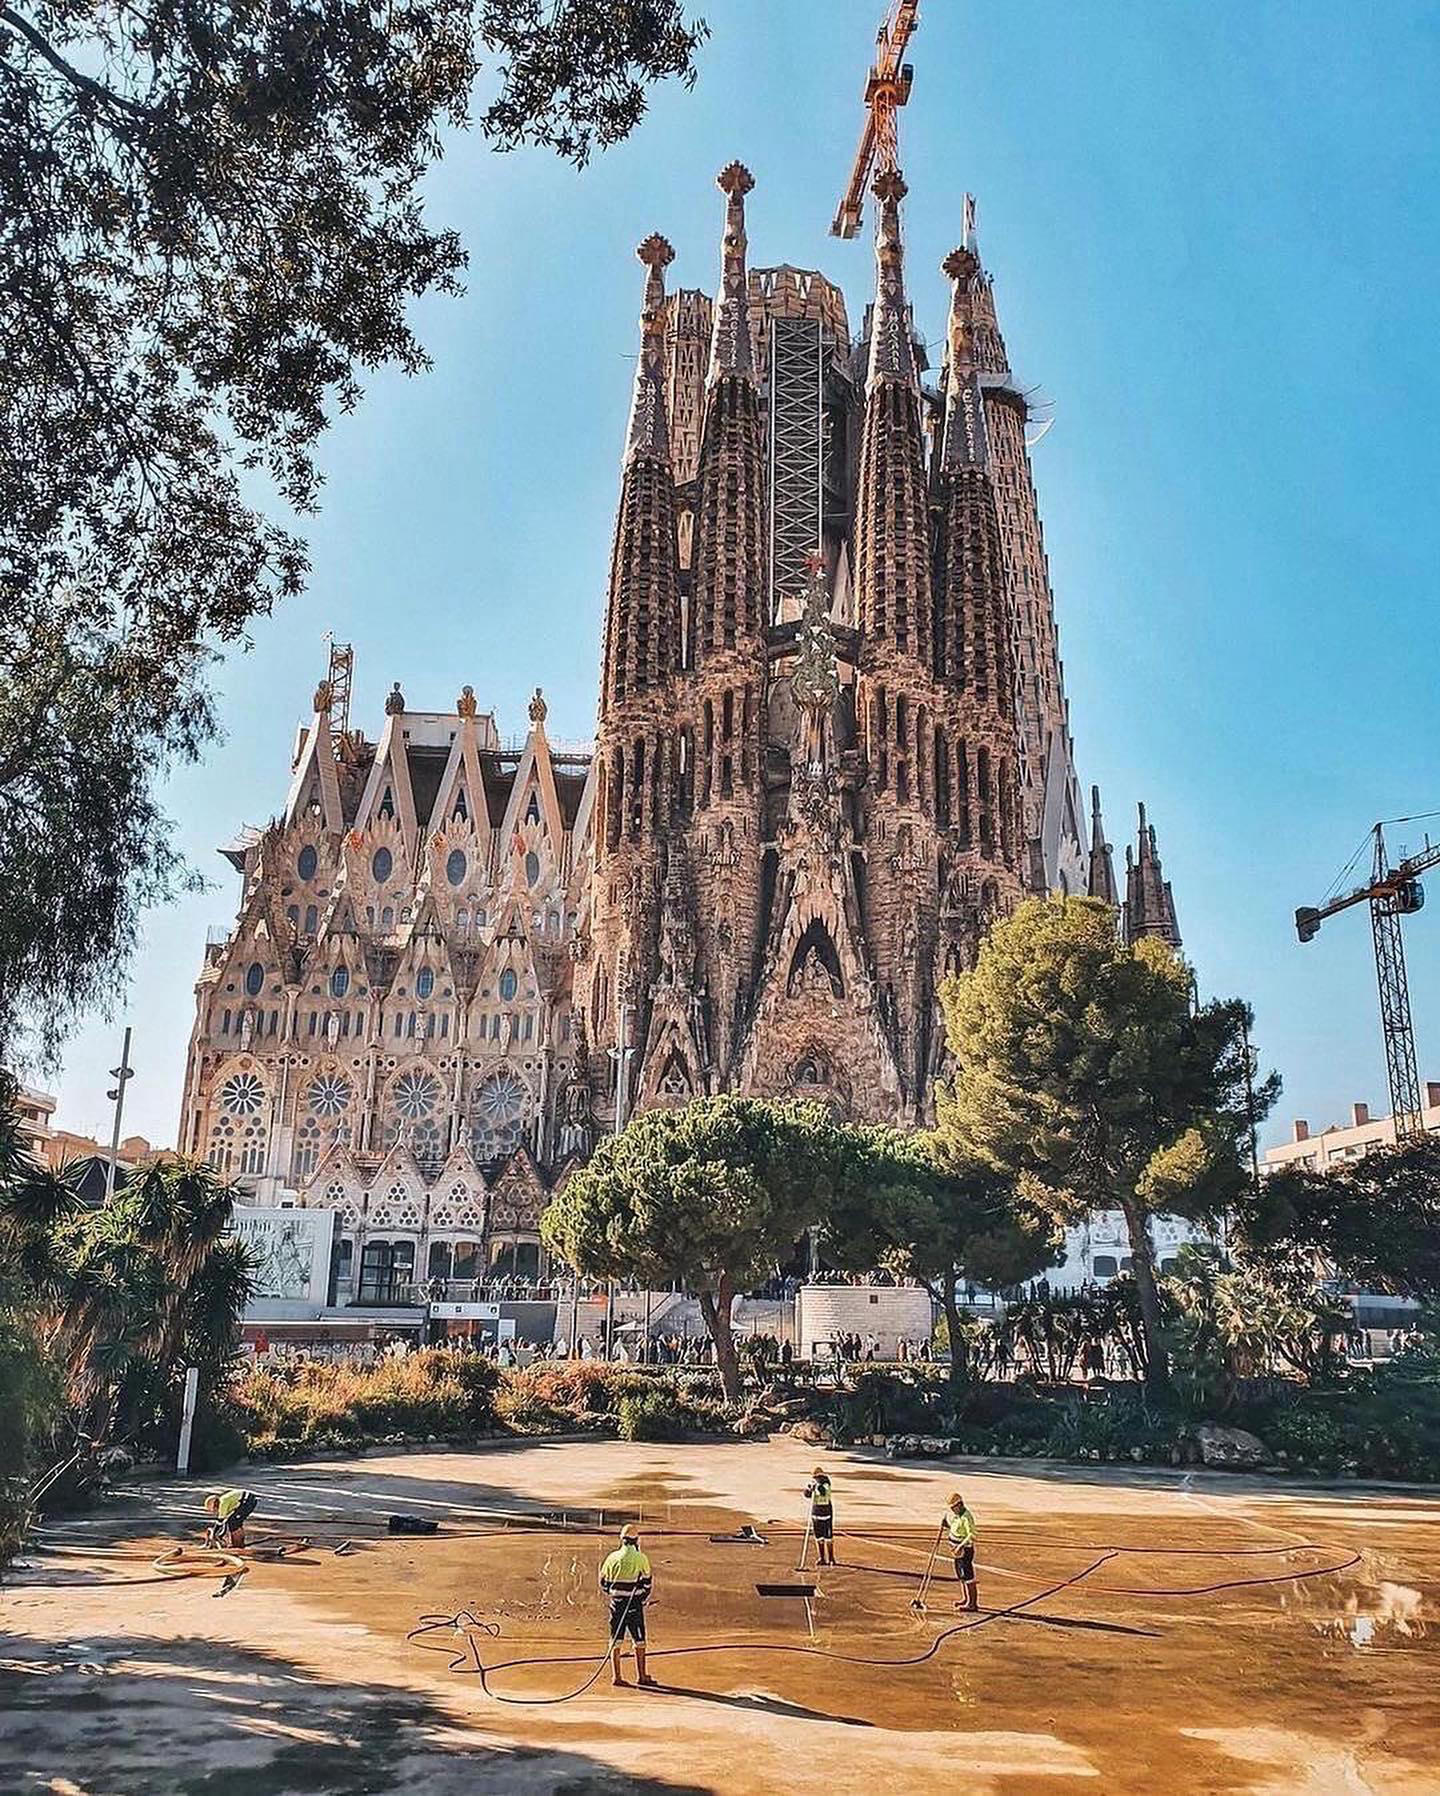 Barcelona’s iconic places 🇪🇸